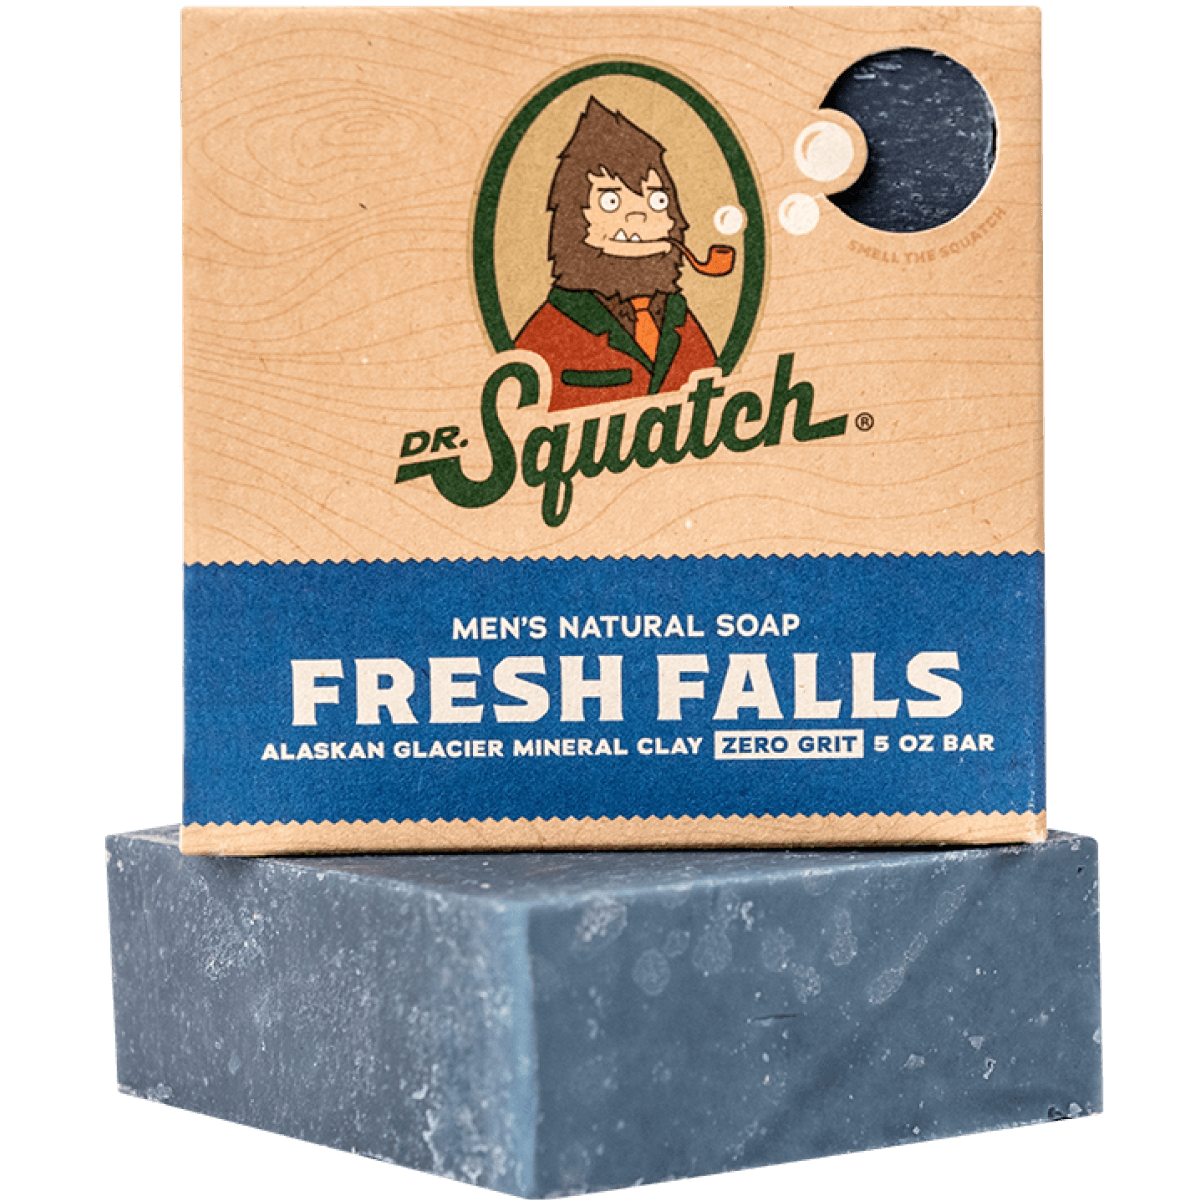 Marvel × Dr. Squatch Limited Edition Spiderman Soap - Spidey Suds